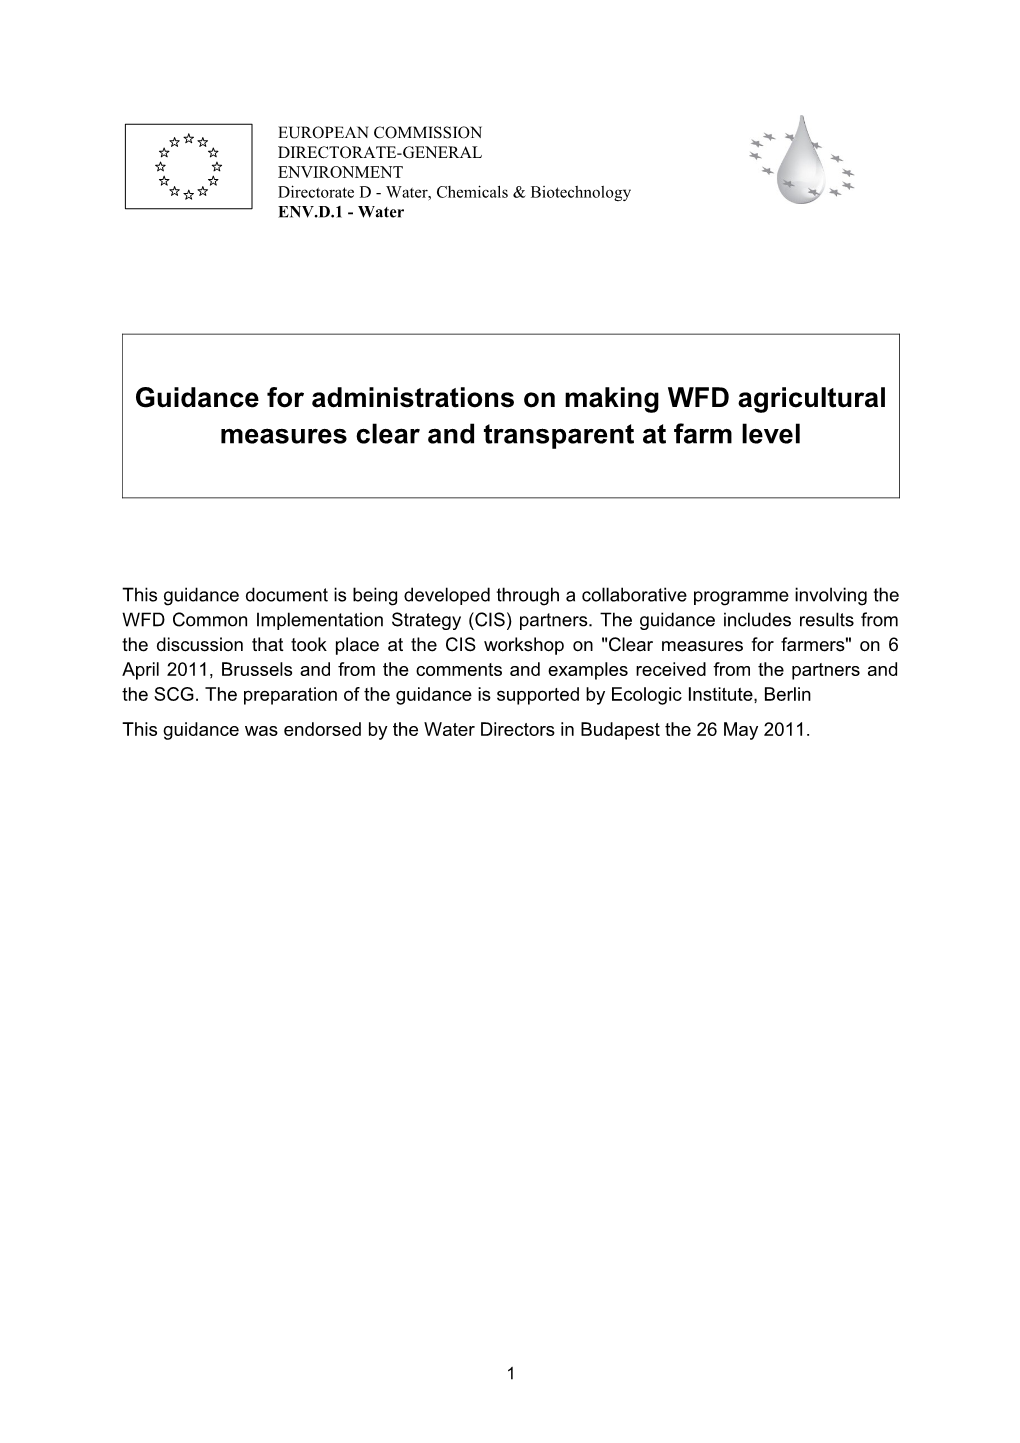 Guidance on Making Agricultural Measures Clear and Transparent at Farm Level